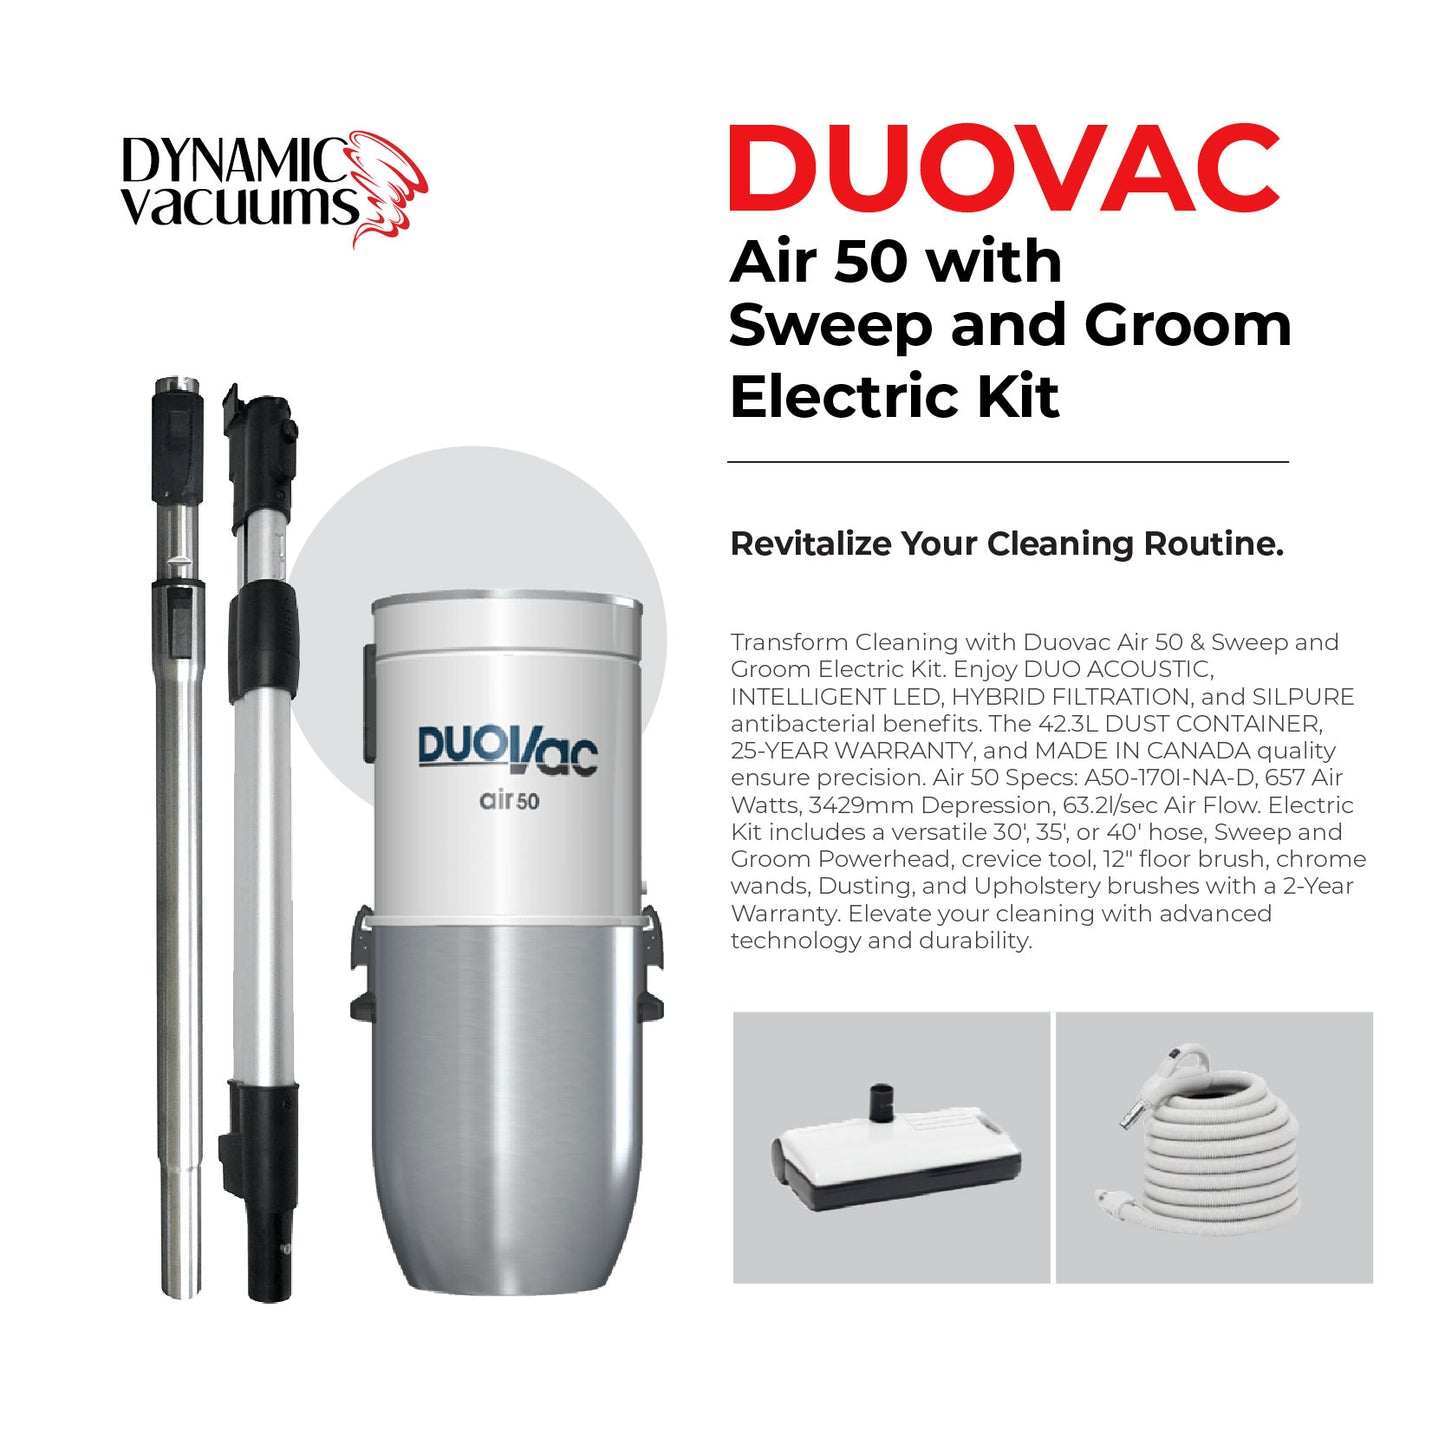 Duovac Air 50 with Sweep and Groom Electric Kit